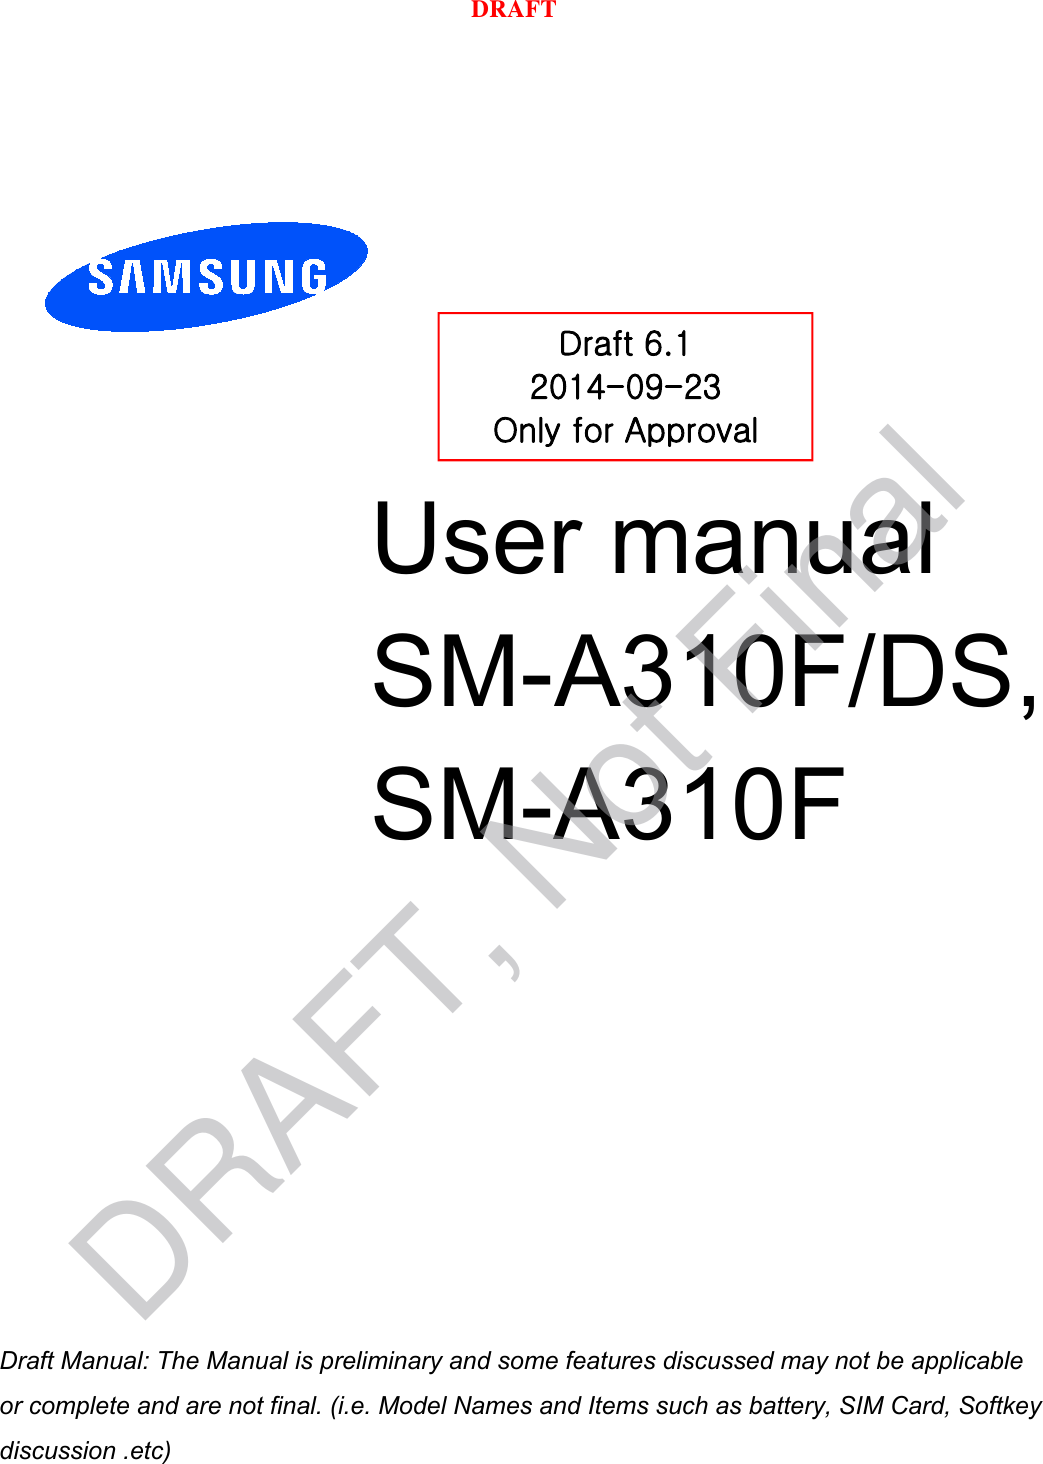 User manual SM-A310F/DS,SM-A310FDraft 6.1 2014-09-23 Only for Approval a ana  ana  na and  a dd a n  aa   and a n na  d a and   a a  ad  dn DRAFT, Not FinalDRAFT